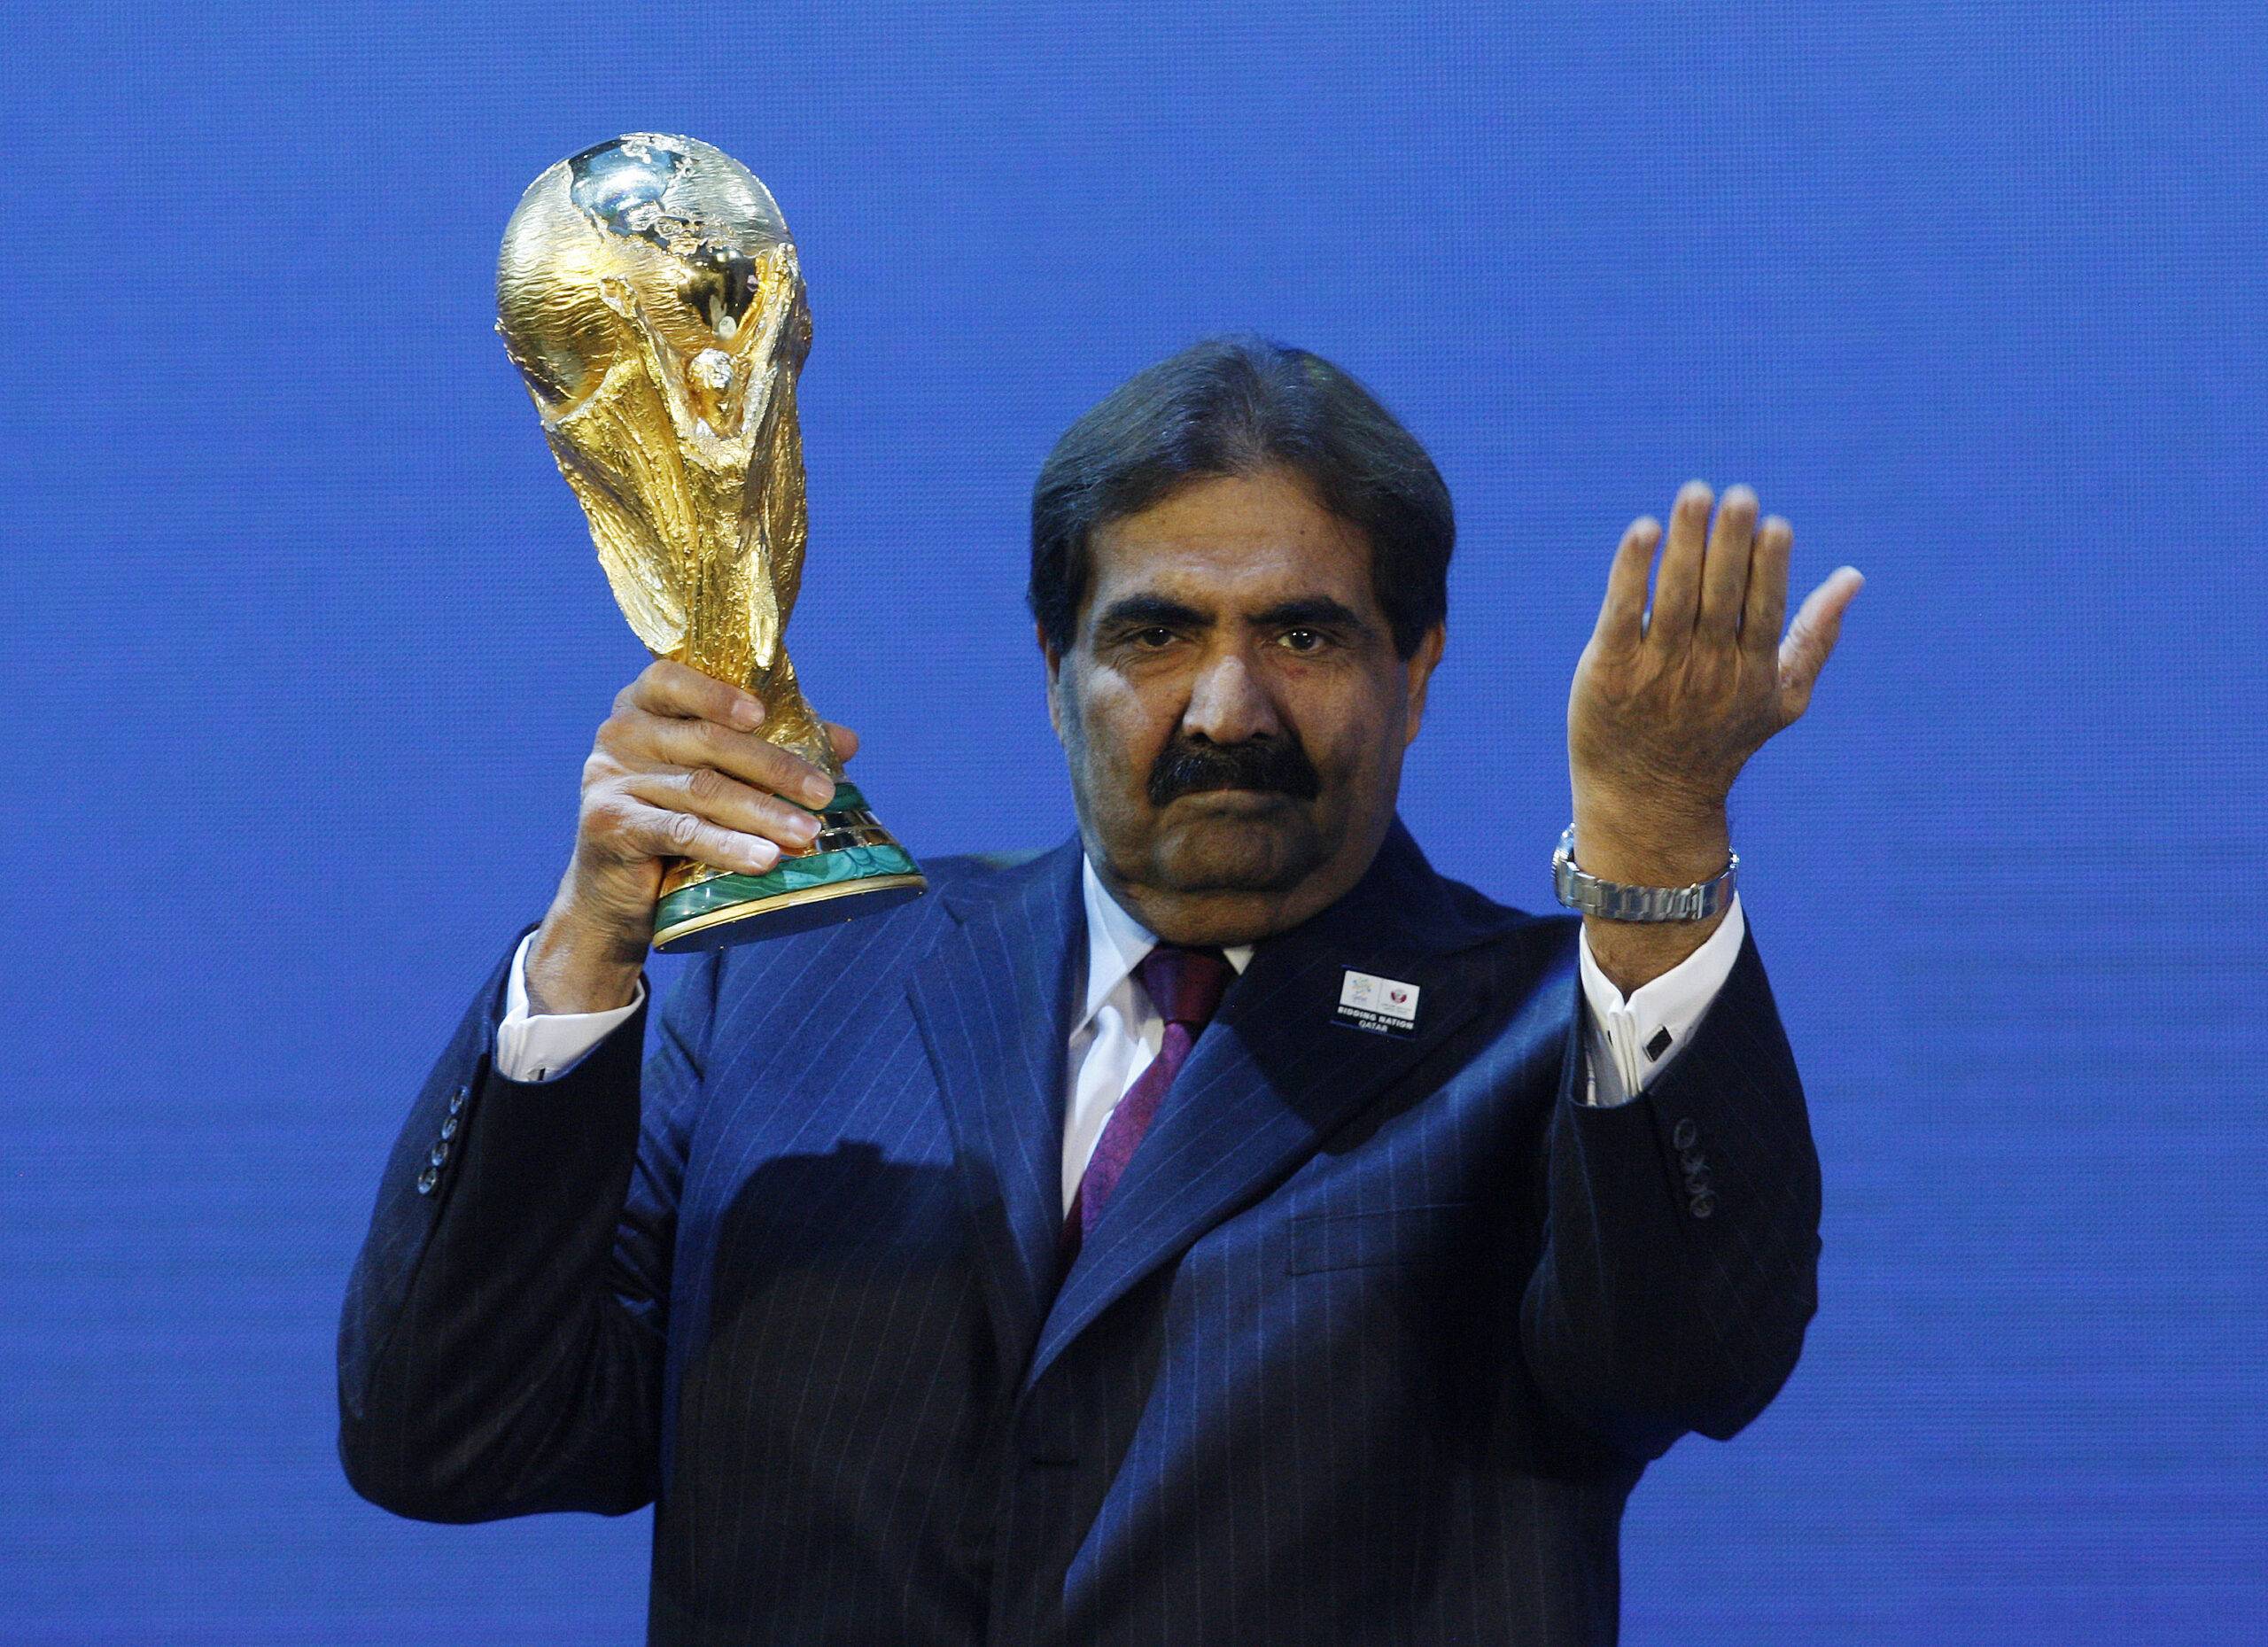 Qatar will host the World Cup.